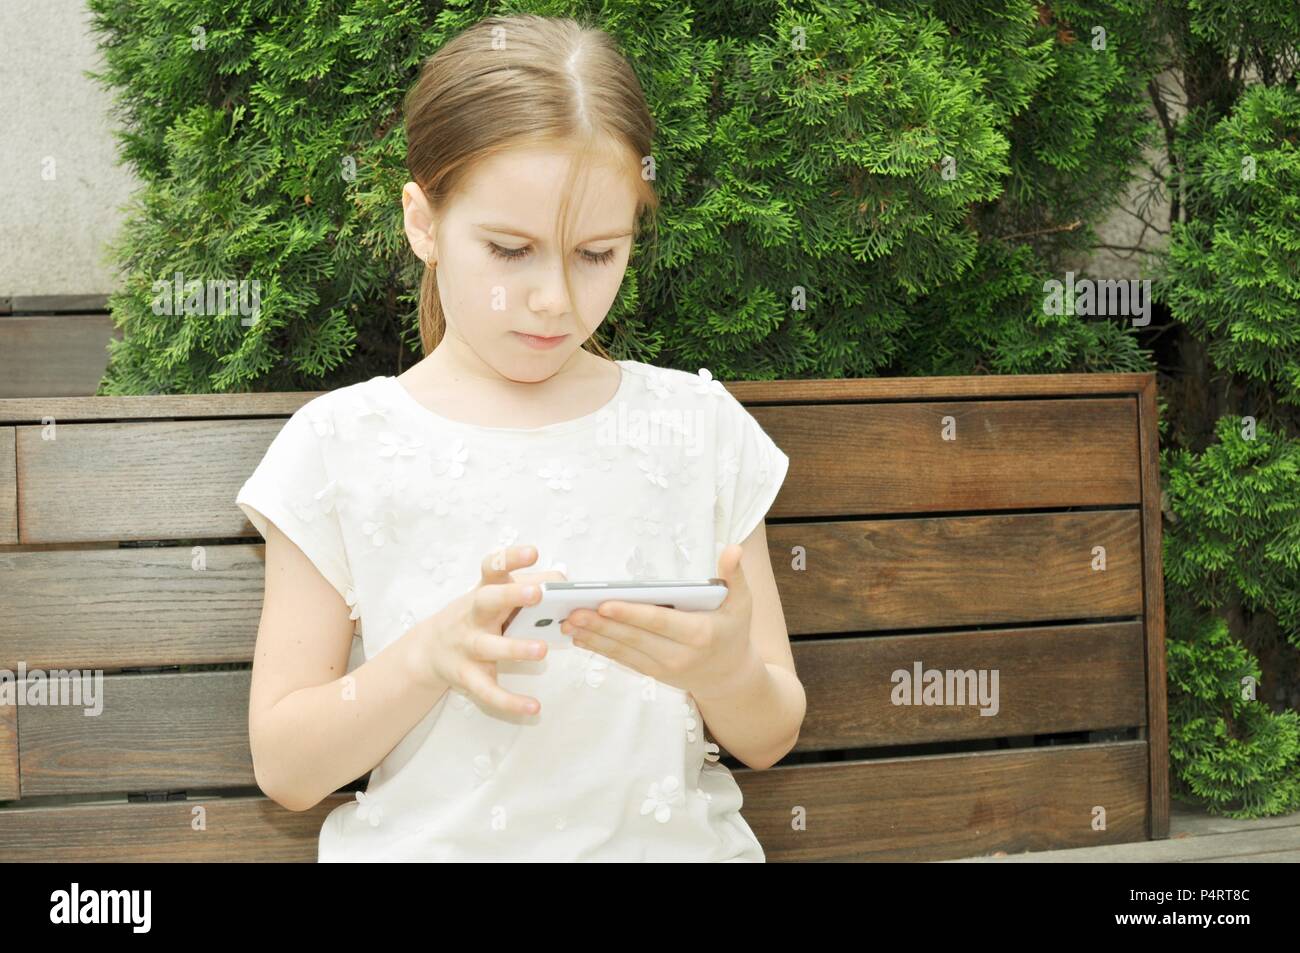 Child, girl 7-9, blond hair, standing on a bench and playing on smartphone, outdoor, retro style, front view Stock Photo